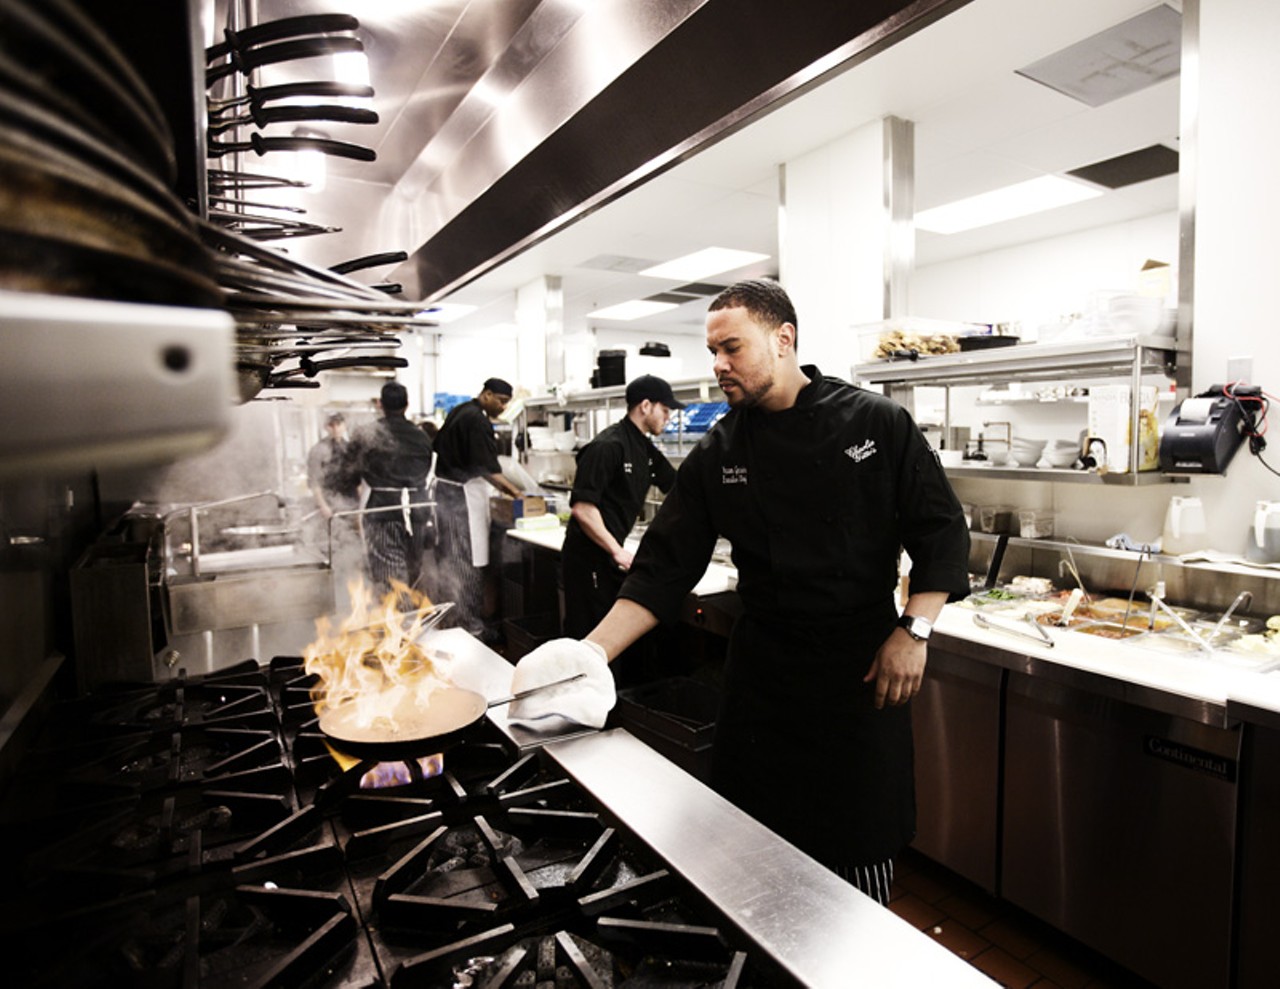 Executive Chef Yaron Garcia at work in the kitchen at Charlie Gitto's in Chesterfield.